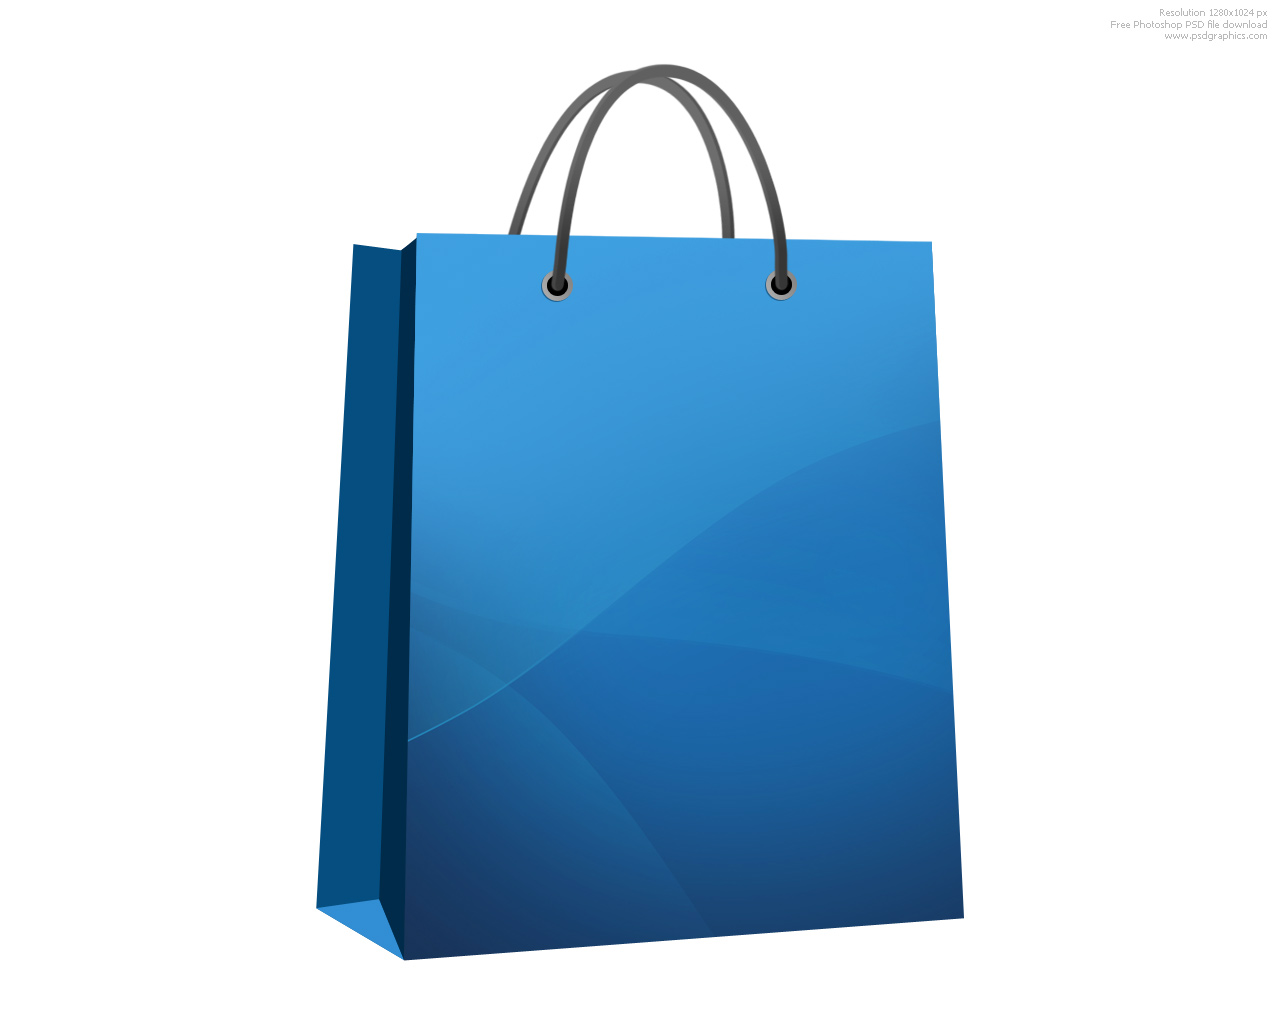 Free Picture Of Shopping Bags, Download Free Picture Of Shopping Bags png image, Free ClipArts on Clipart Library